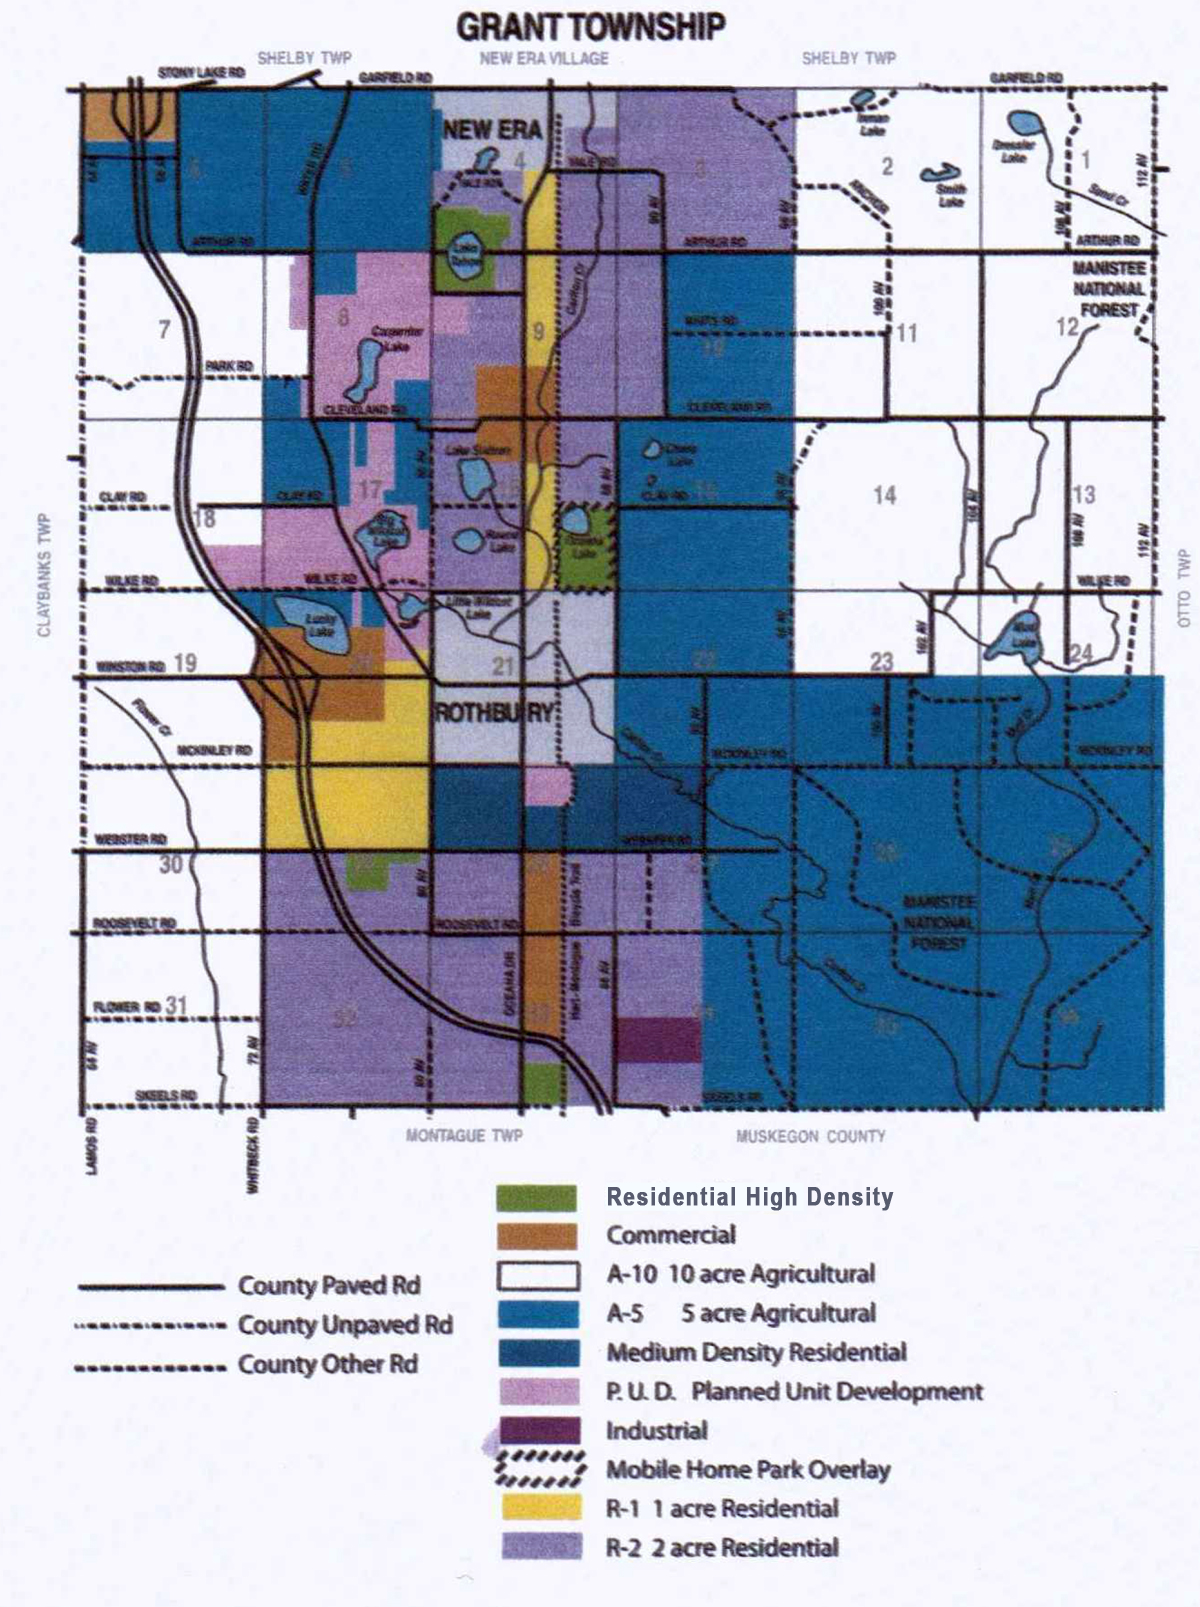 Grant County Township Map Grant Township Zoning Map - Grant Township